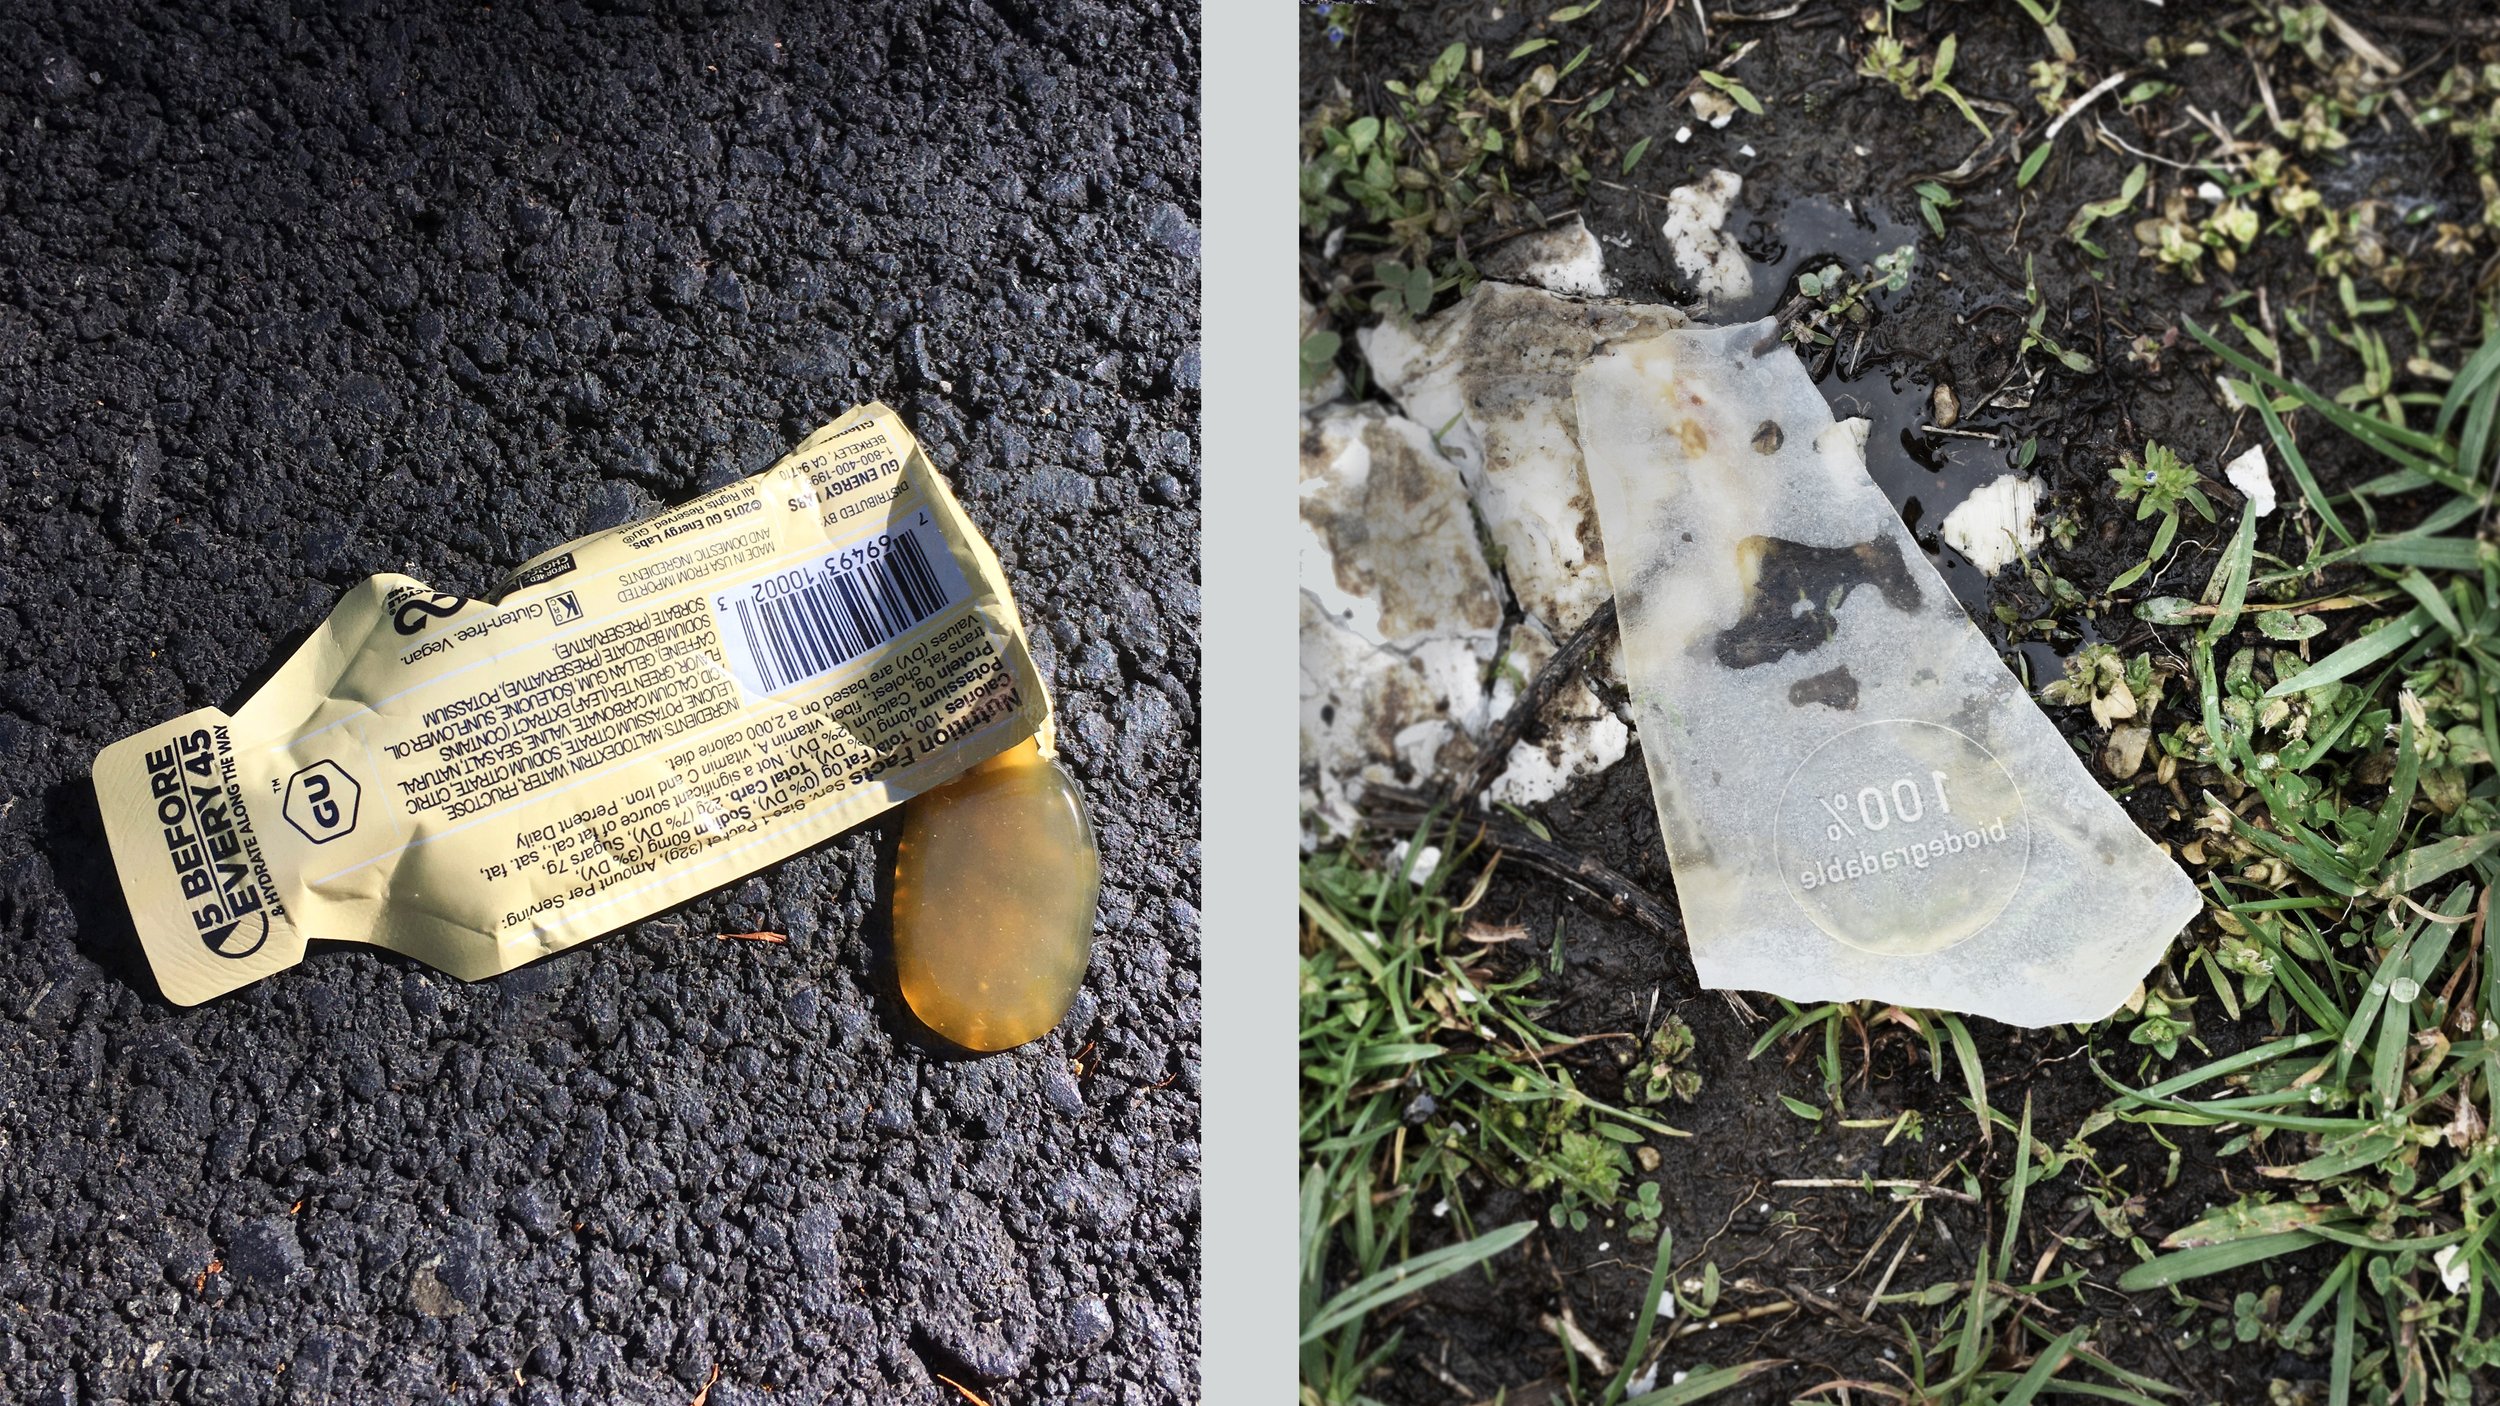  A GU Energy Gel (Left) seen on the side of the road during the Sagan Gran Fondo in Windsor, California in November, 2019.  A used Gone package (right), when littered, will quickly biodegrade in a matter of days.  